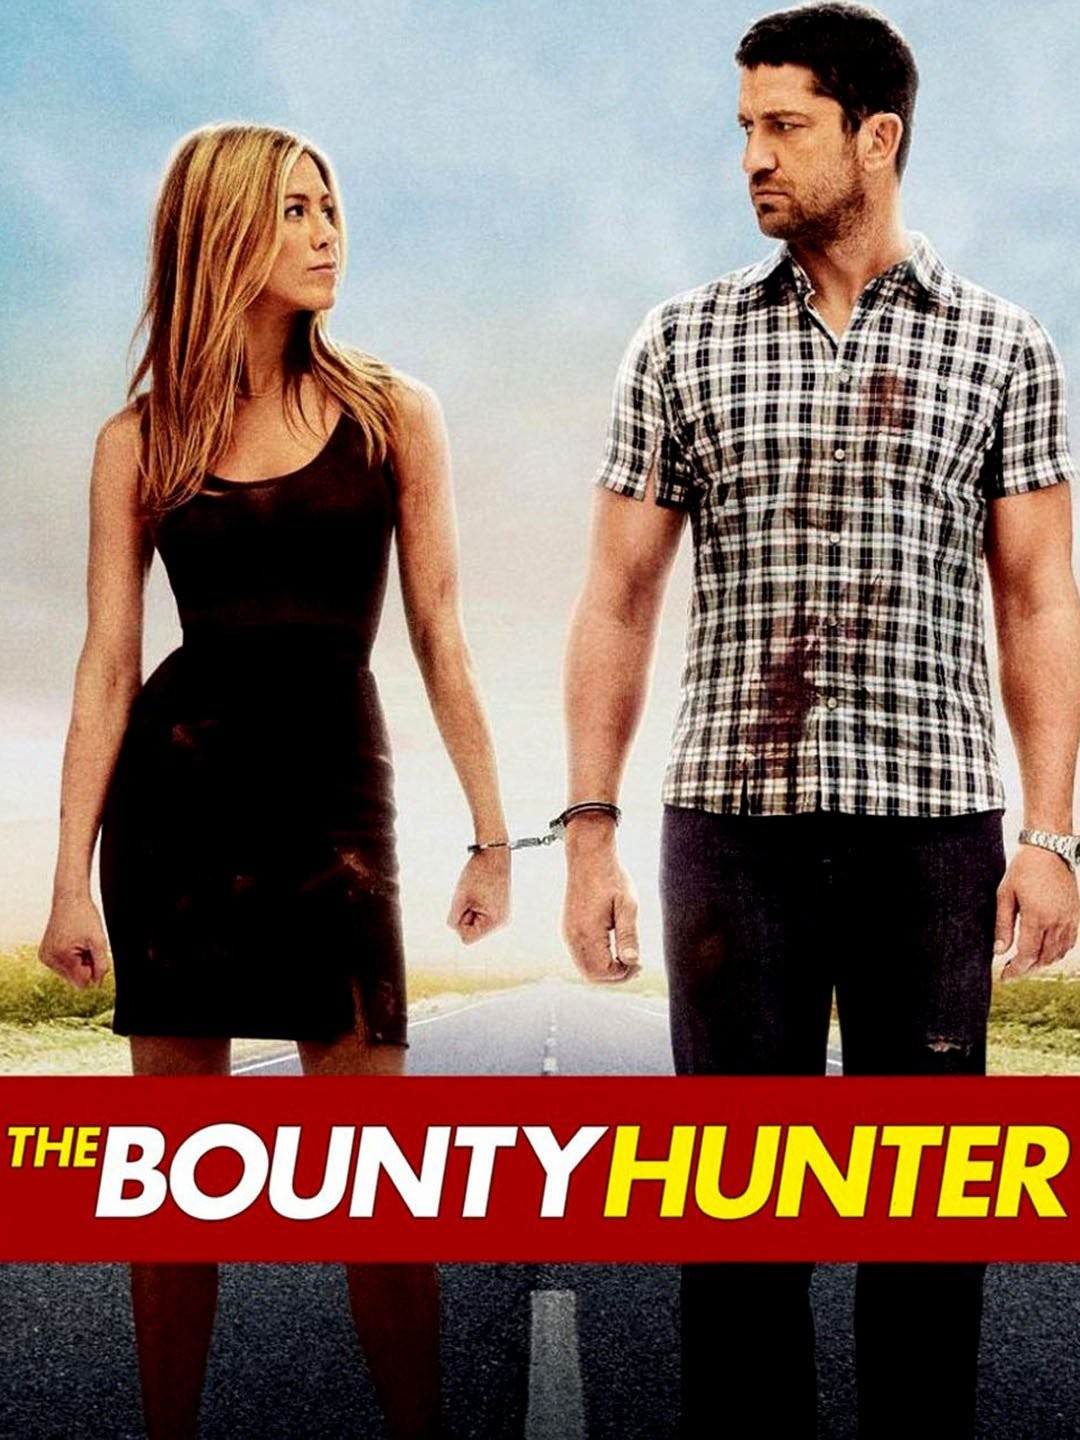 dan mcilvaine recommends official bounty hunter parody pic